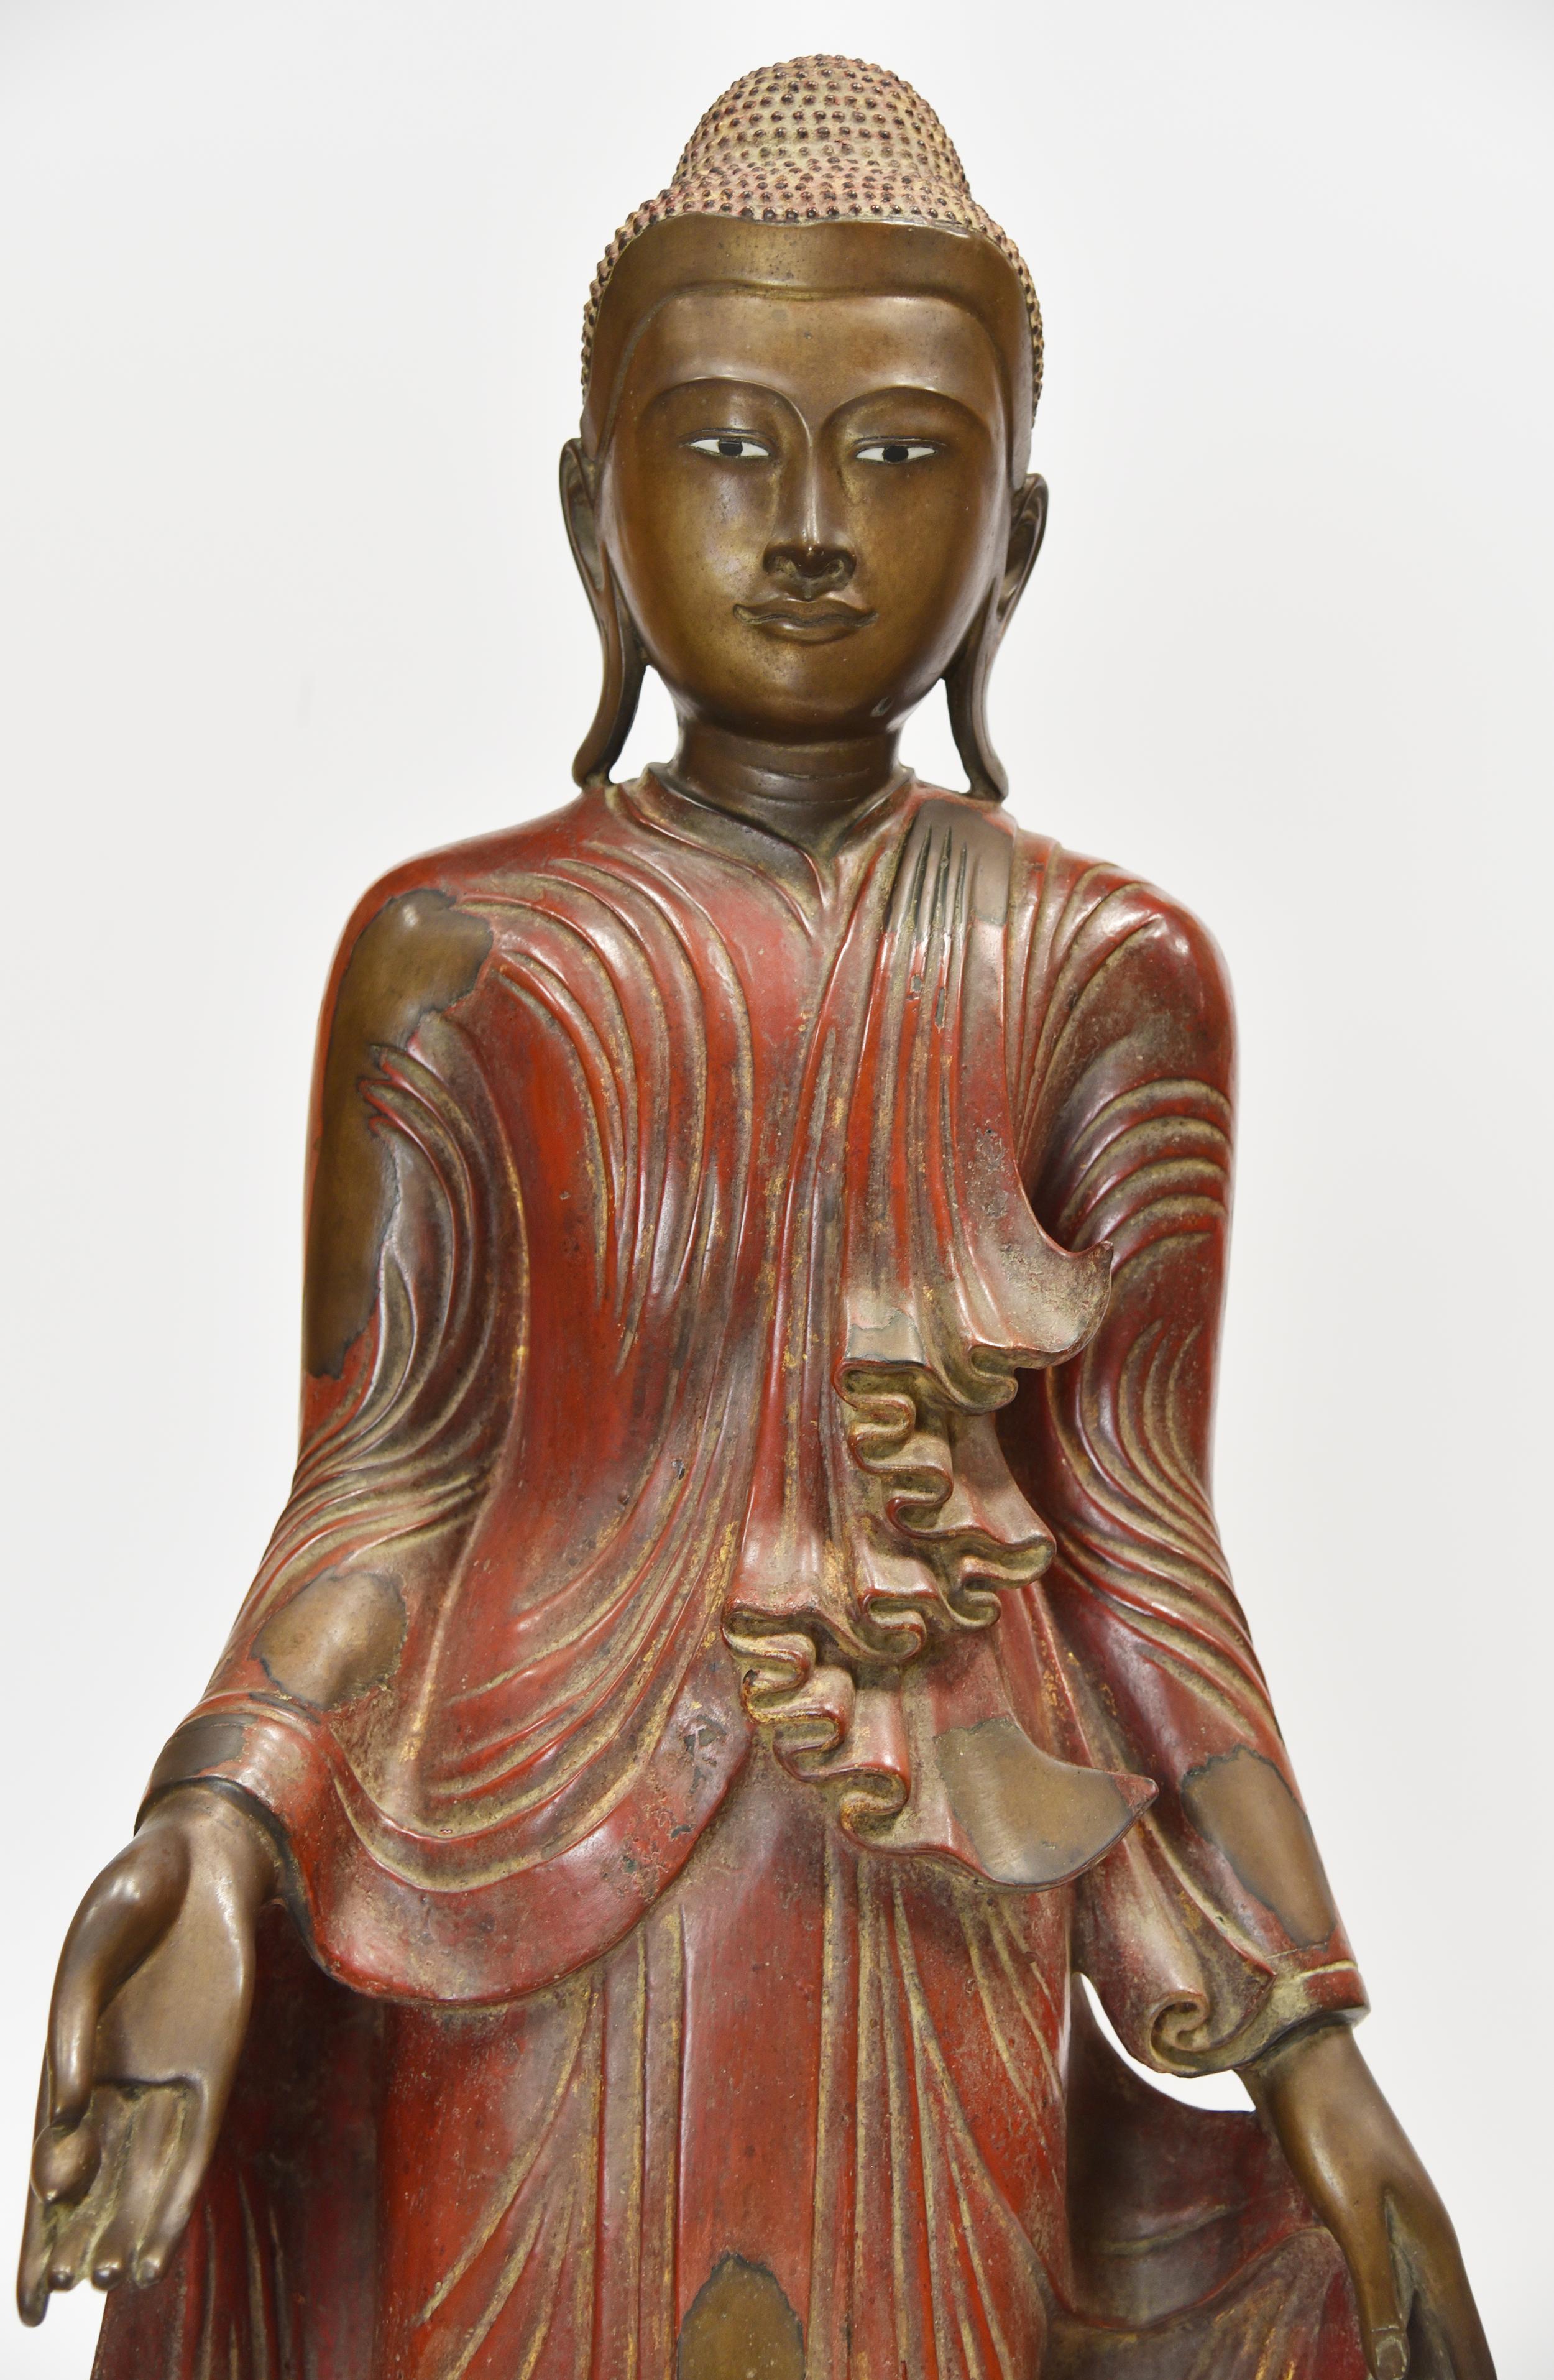 A two-part tall standing cast bronze Buddha figure with jewelled, gilt-inlaid base. Original red lacquer painting in this figure and fully robed design shows throughout this figure. Gorgeous intact expression in the face and body of this female